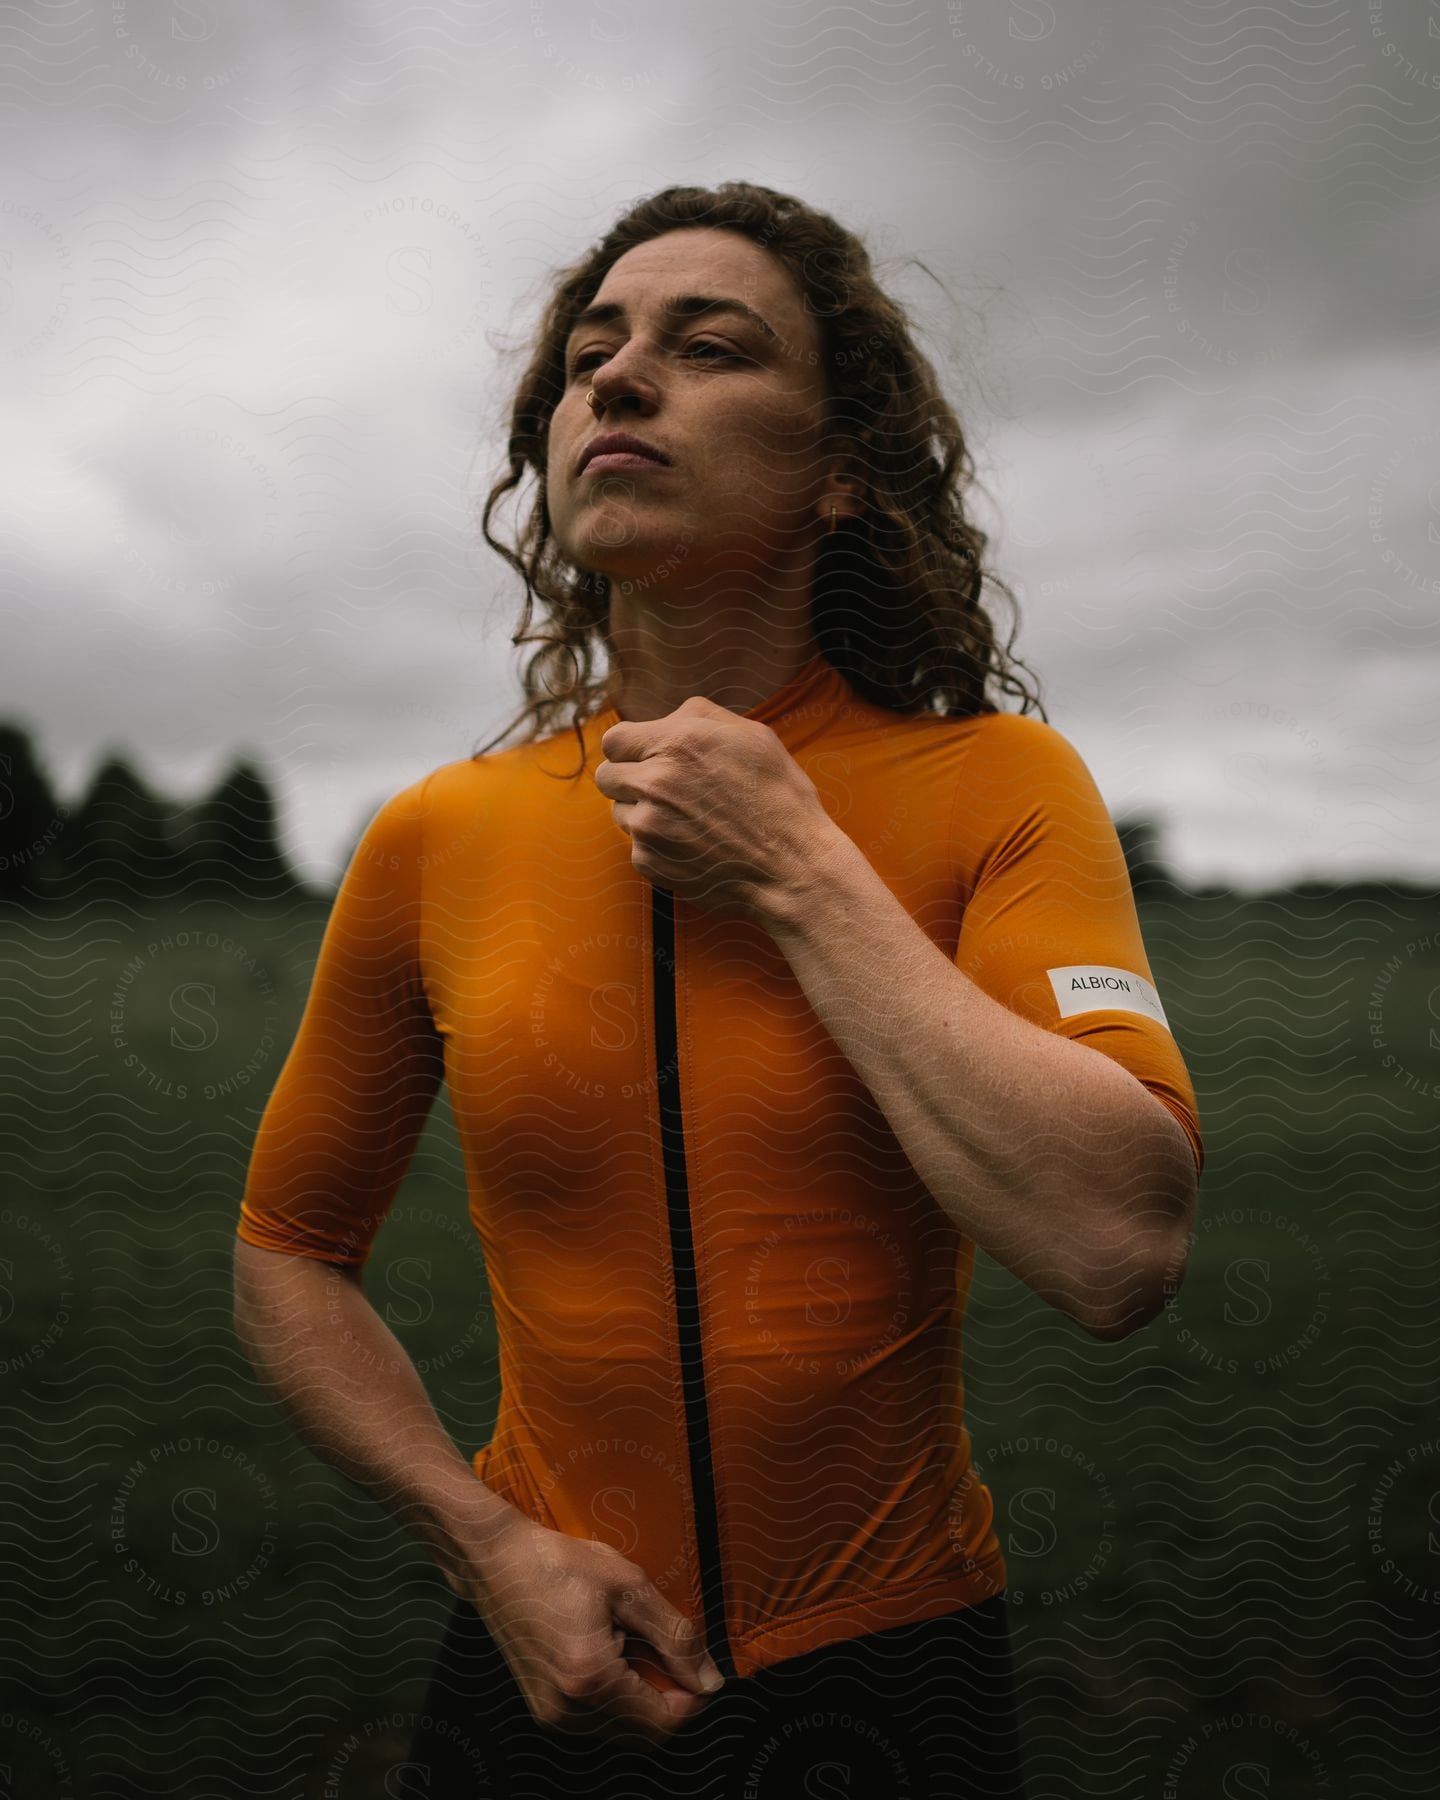 Model zipping up orange top and cycling jacket while standing in a field on a cloudy day